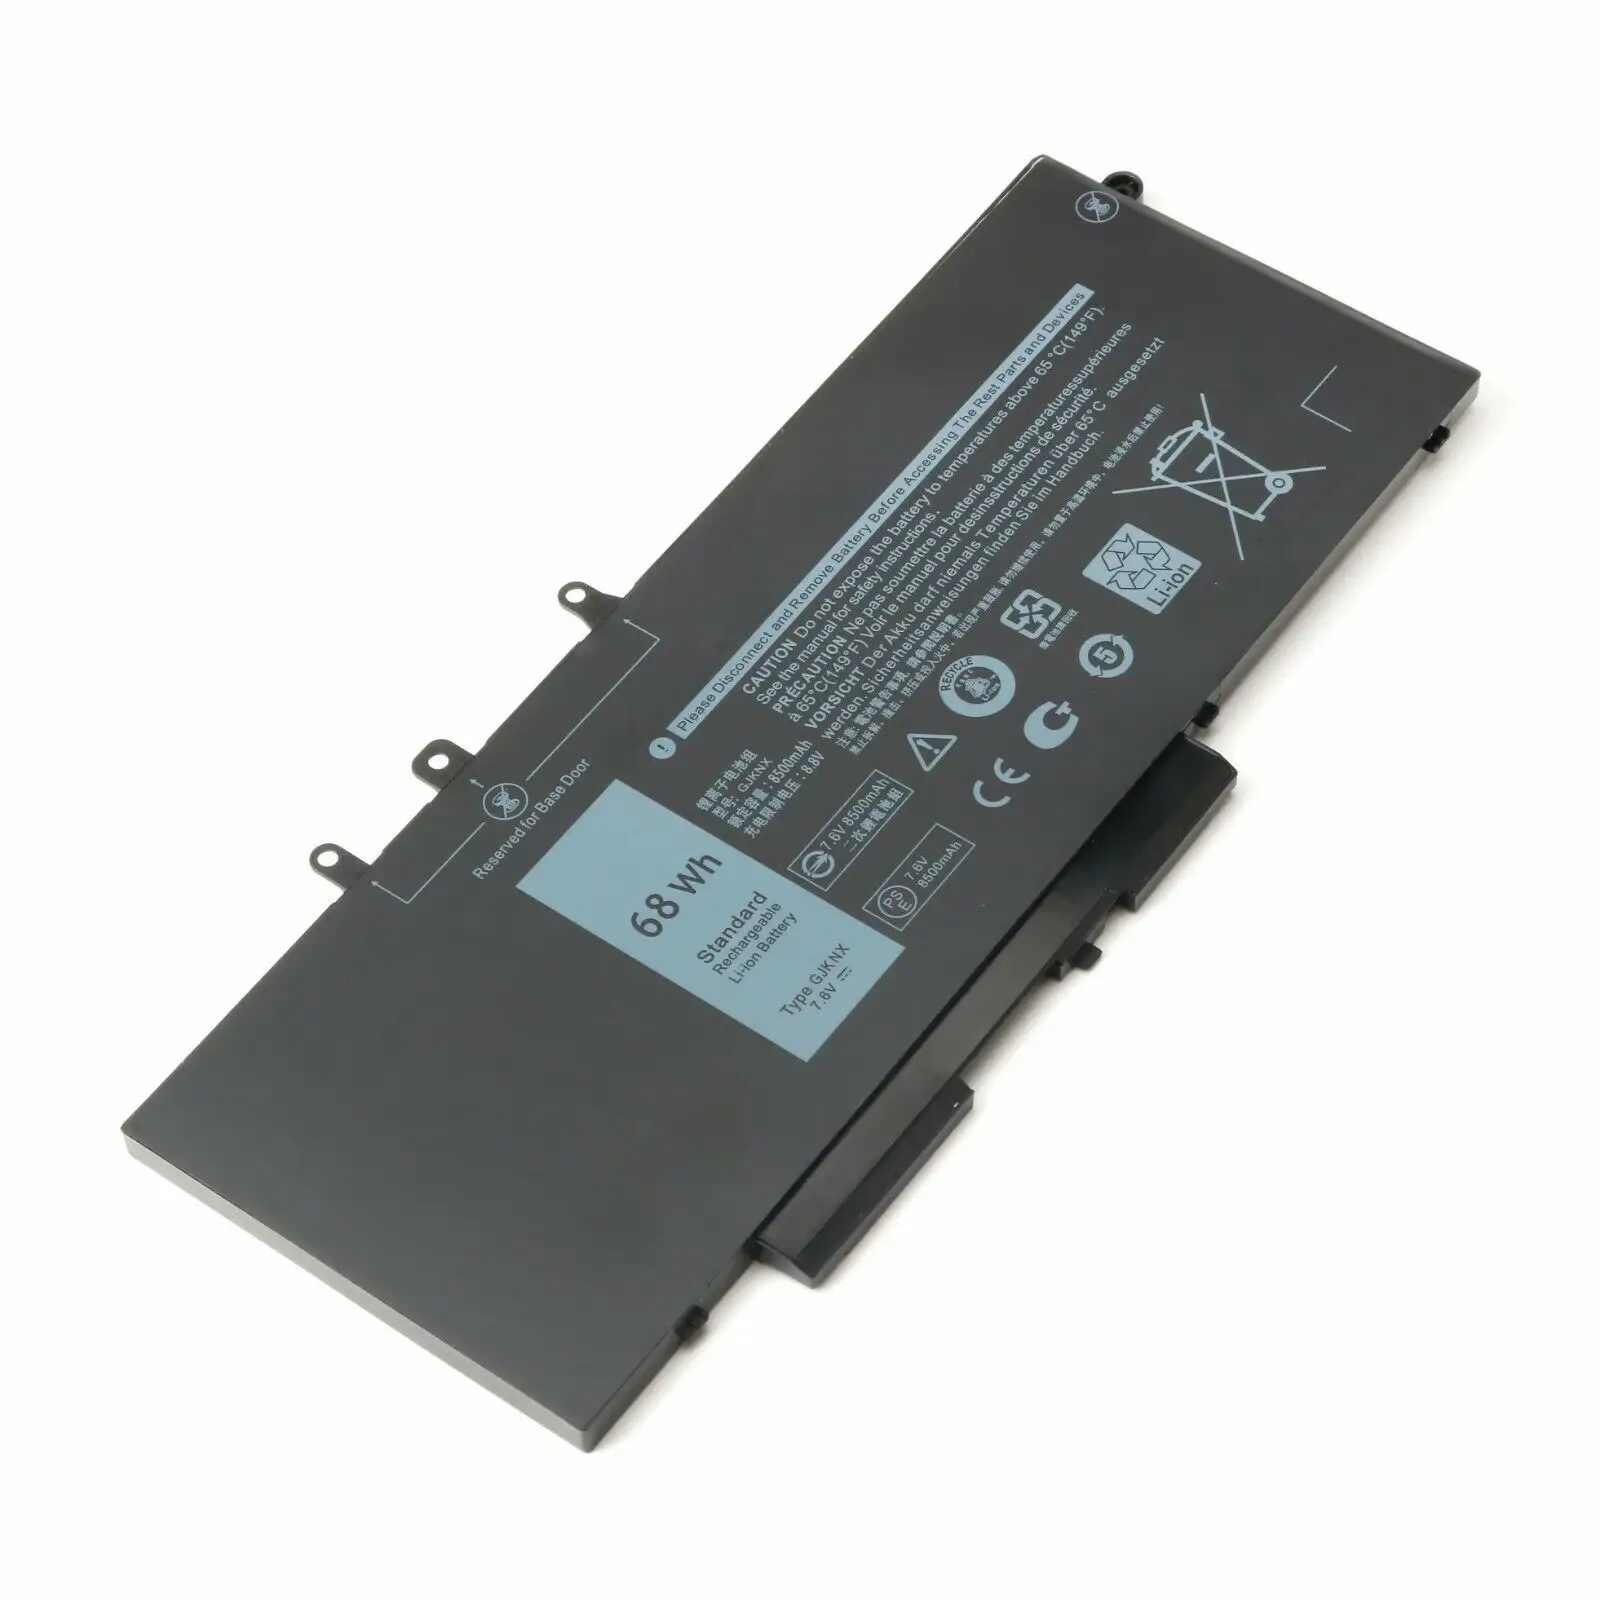 68Wh GJKNX Battery Replacement Laptop Internal Battery for Dell Latitude 5480 5580 5280 5590 5490 Laptop Batteries